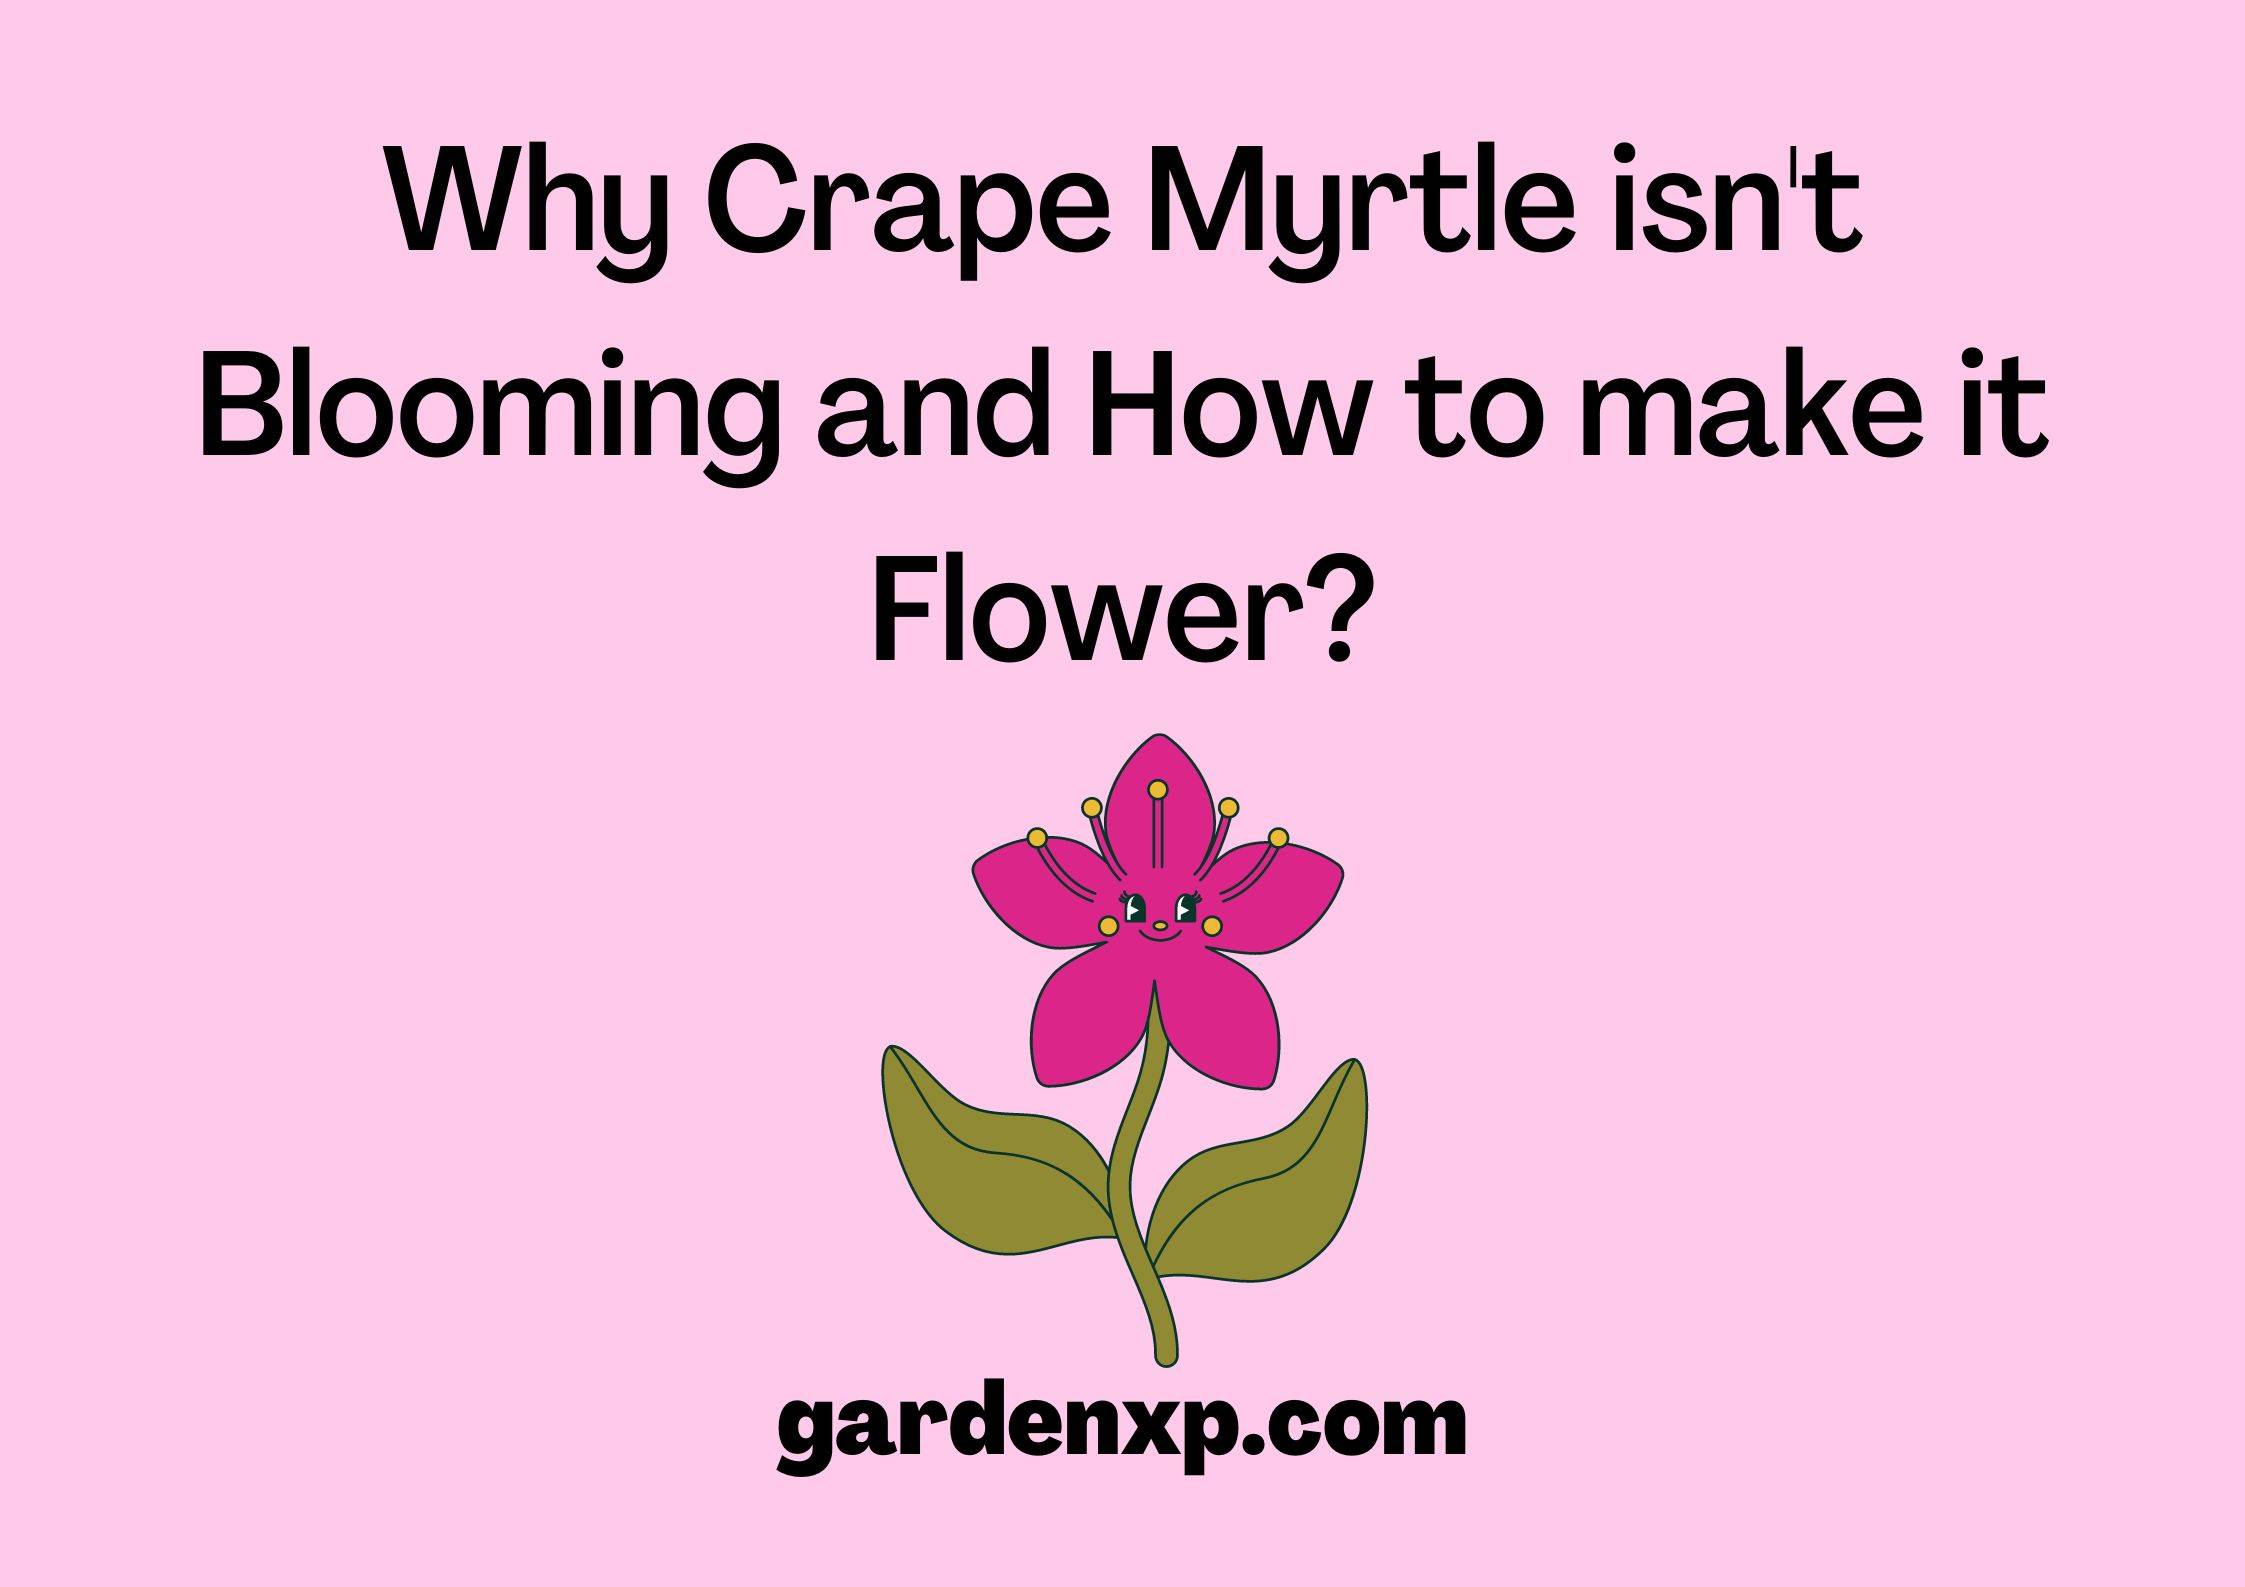 Why Crape Myrtle isn't Blooming and How to make it Flower?